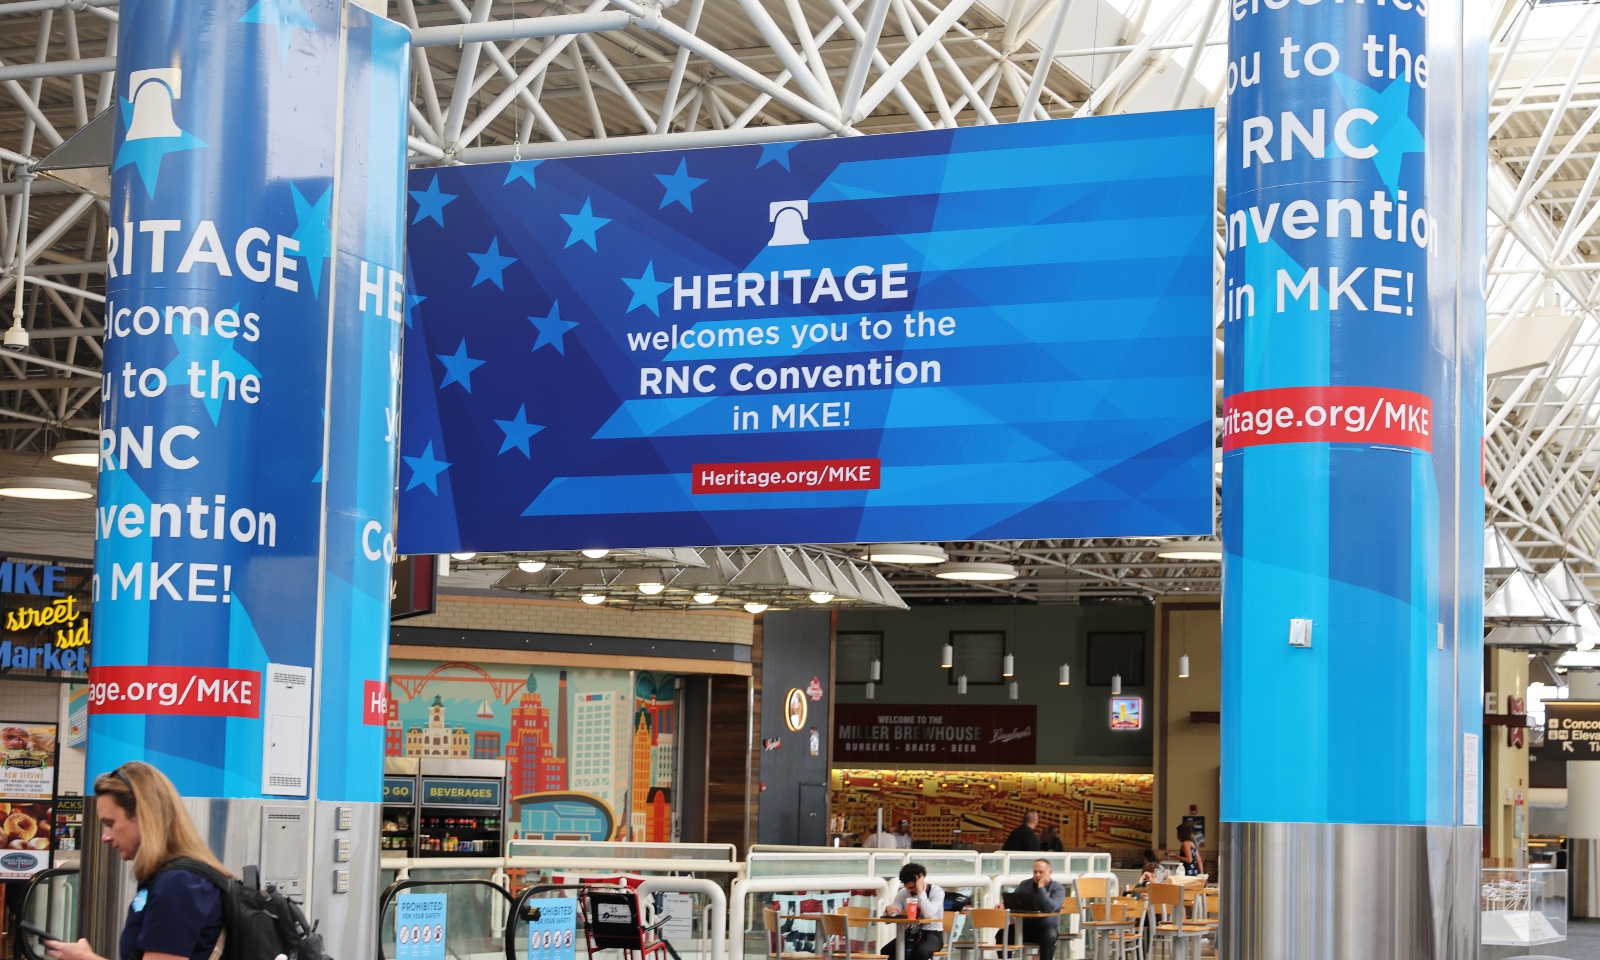 A large, blue sign with the words "Heritage welcomes you to the RNC Convention in MKE" on it hangs between two pillars at the Milwaukee airport.